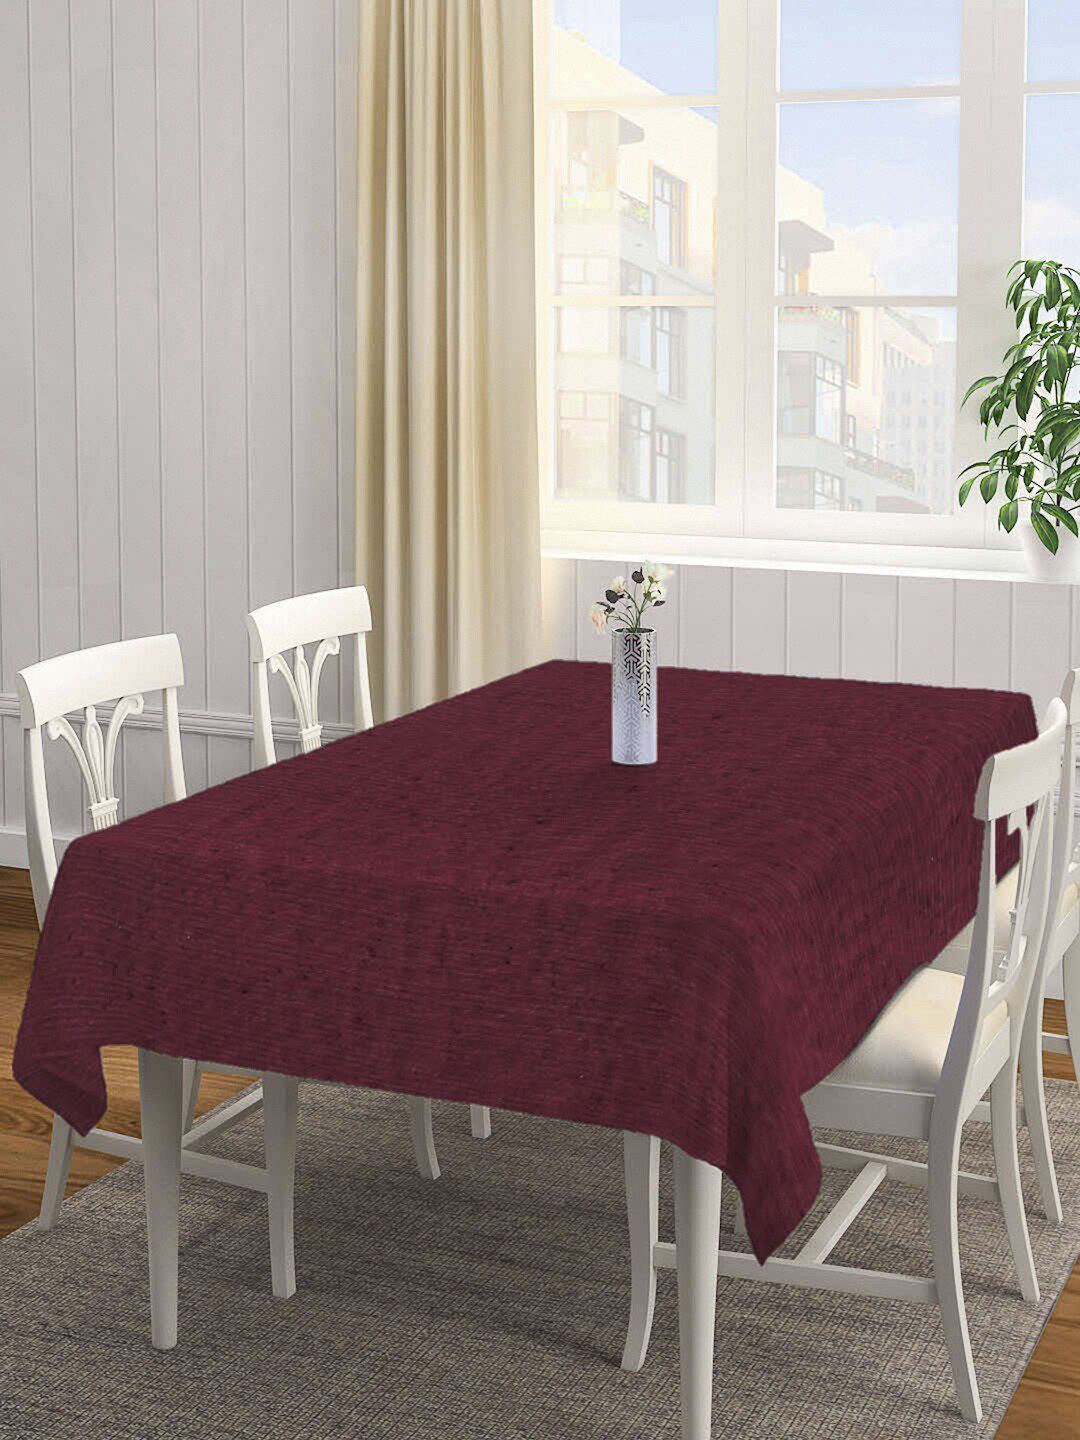 KLOTTHE Maroon Solid 6-Seater Rectangular Cotton Table Cover Price in India